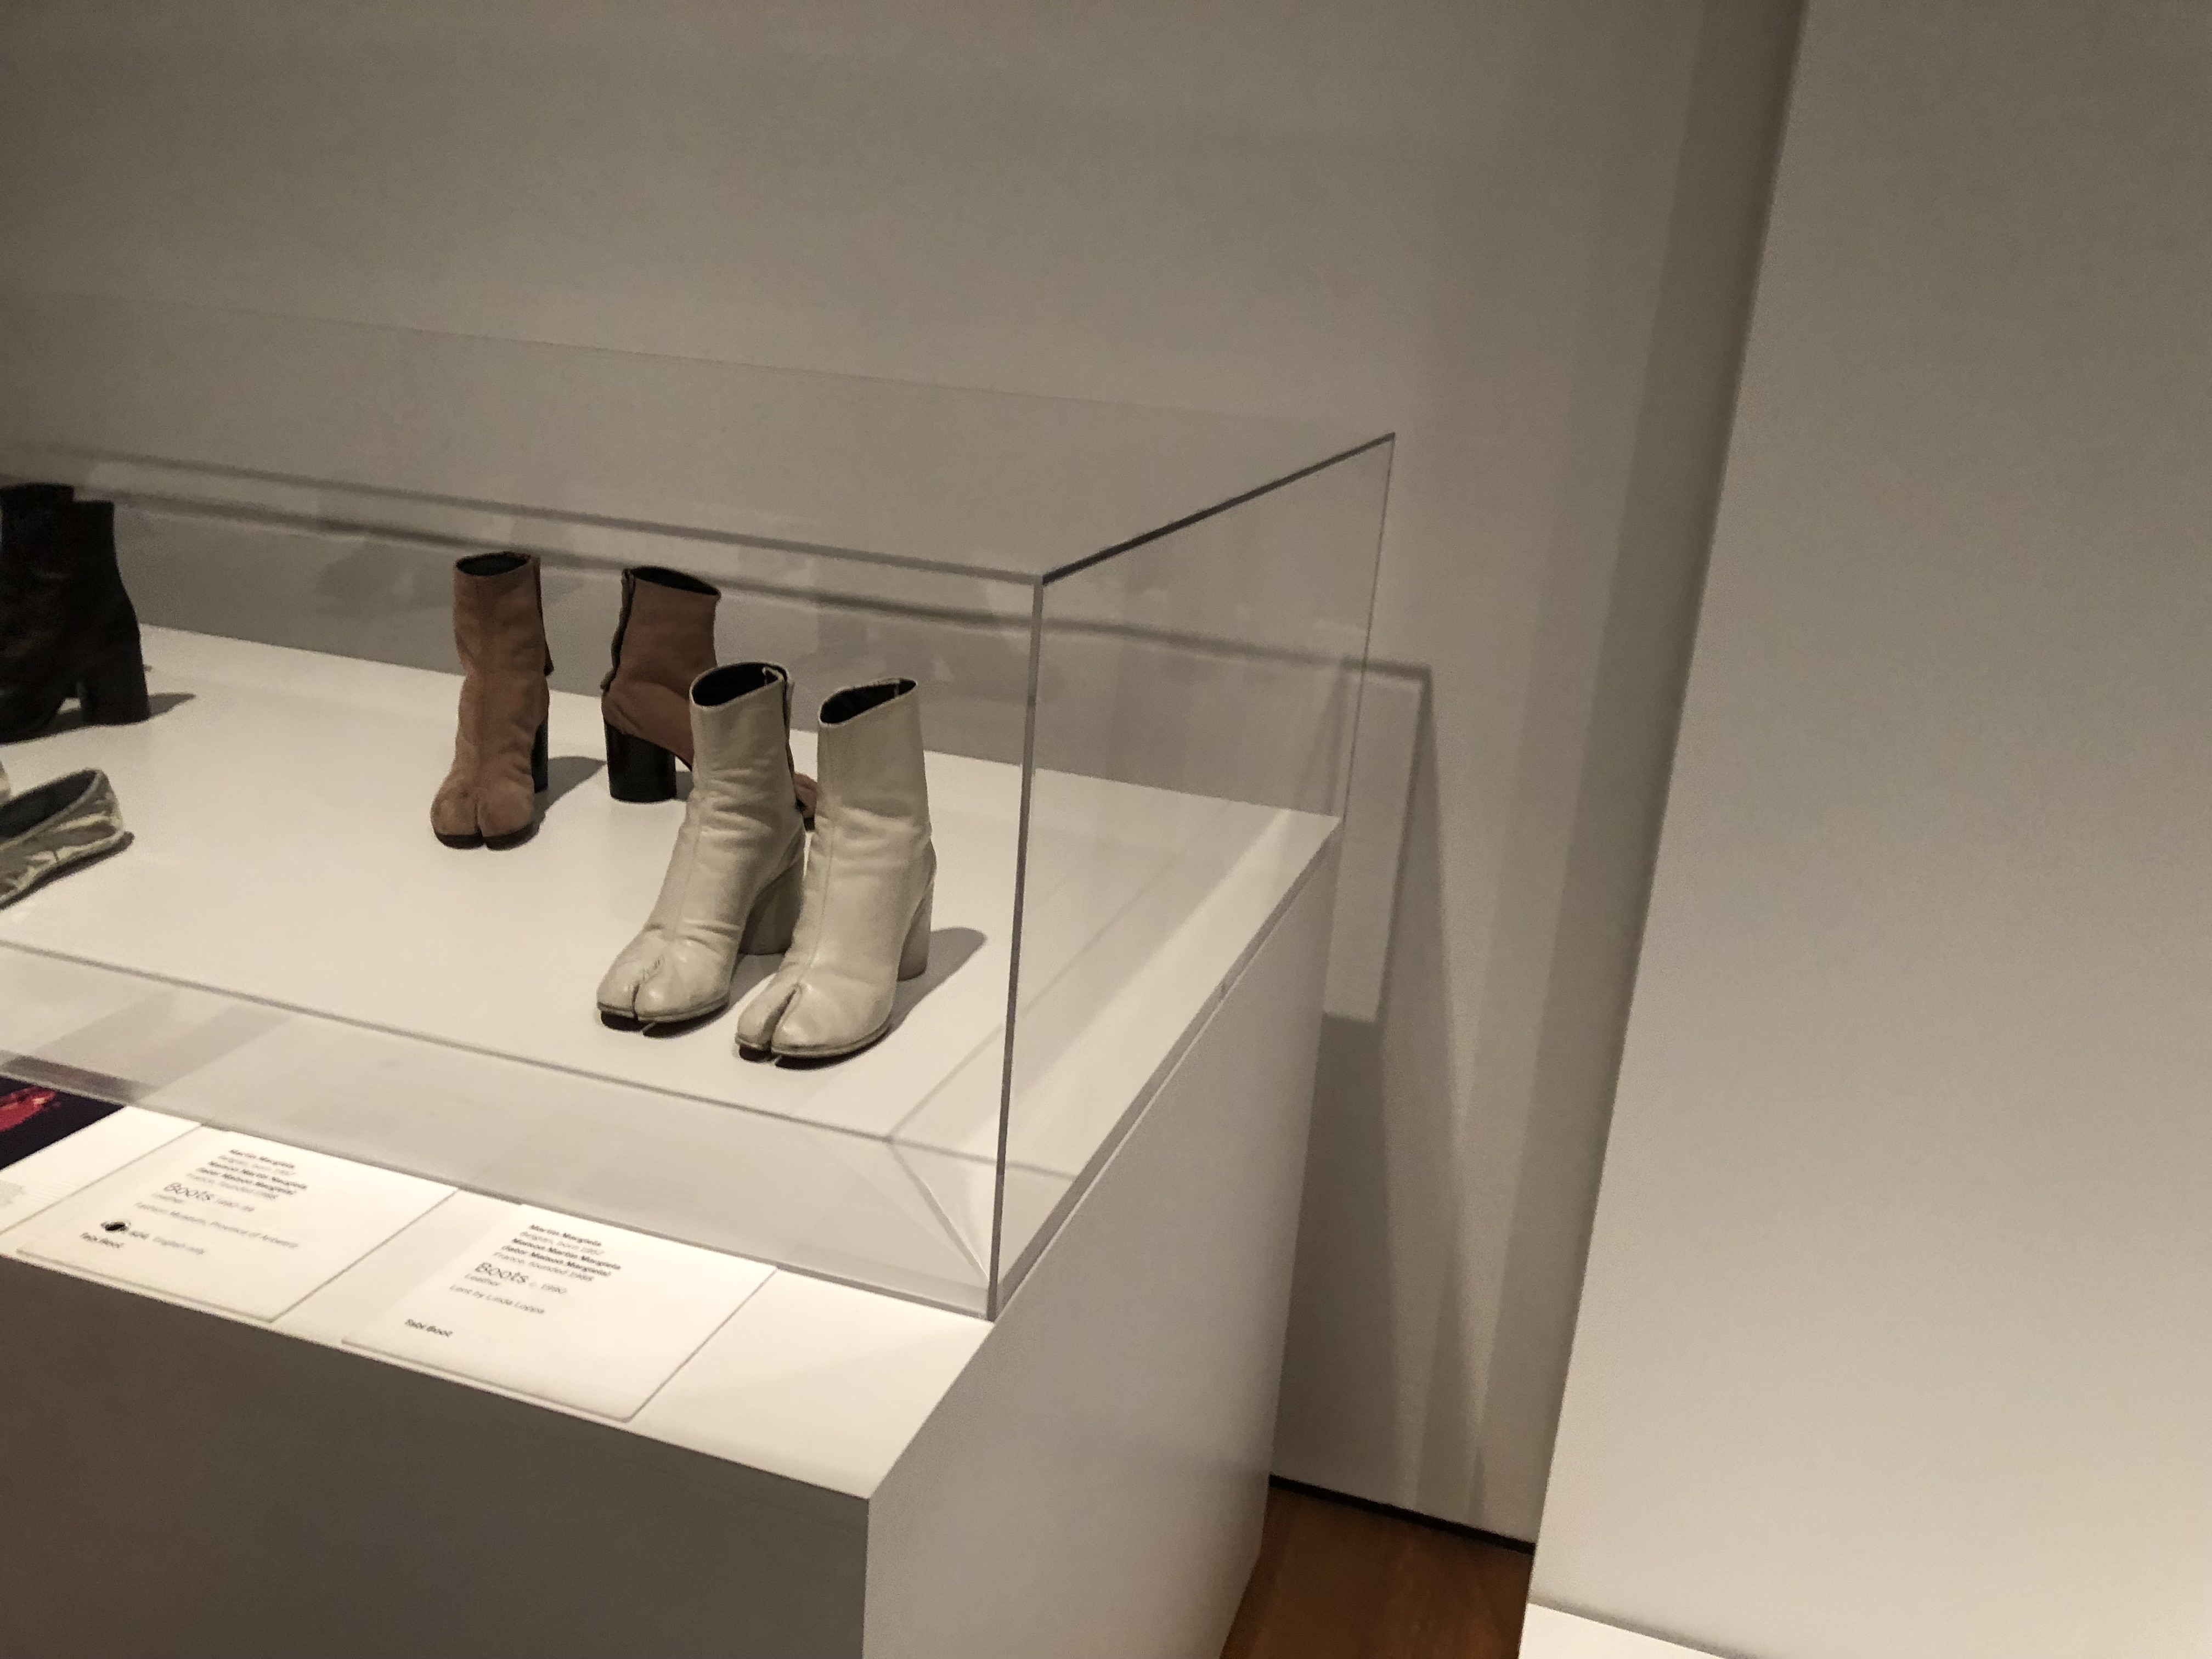 Research: Is fashion modern? @ Moma Items